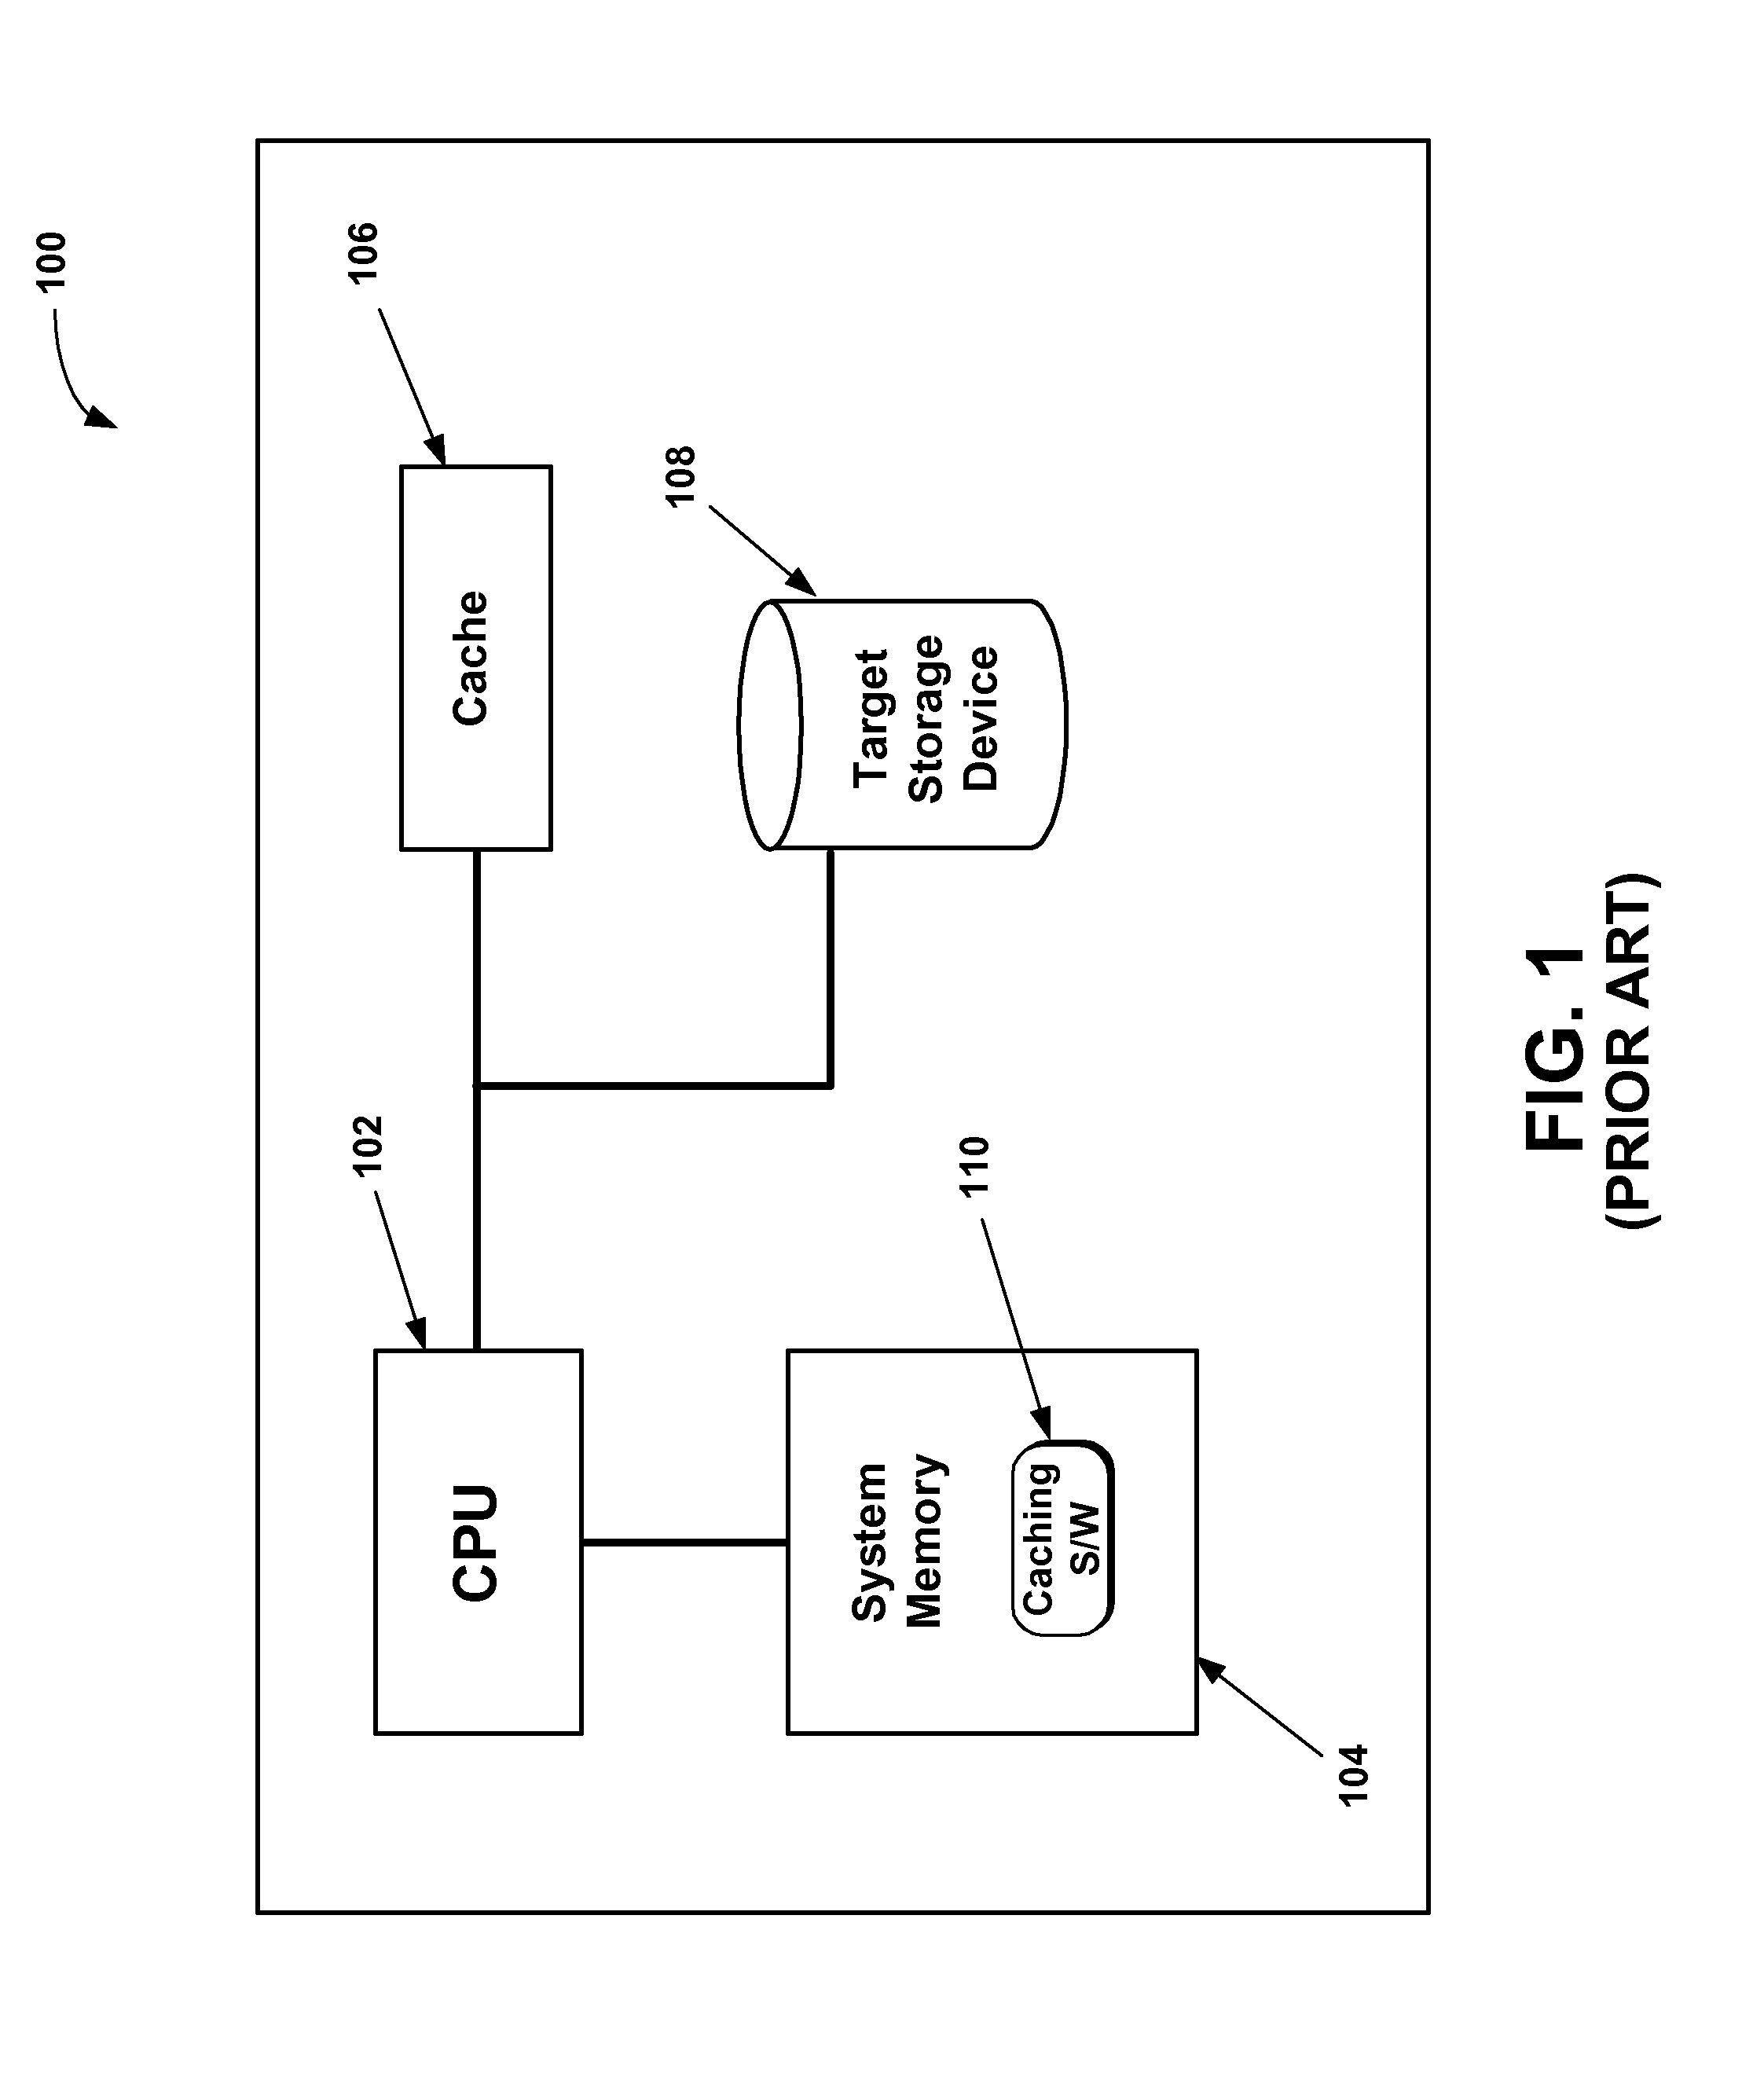 Method for protecting a gpt cached disks data integrity in an external operating  system environment